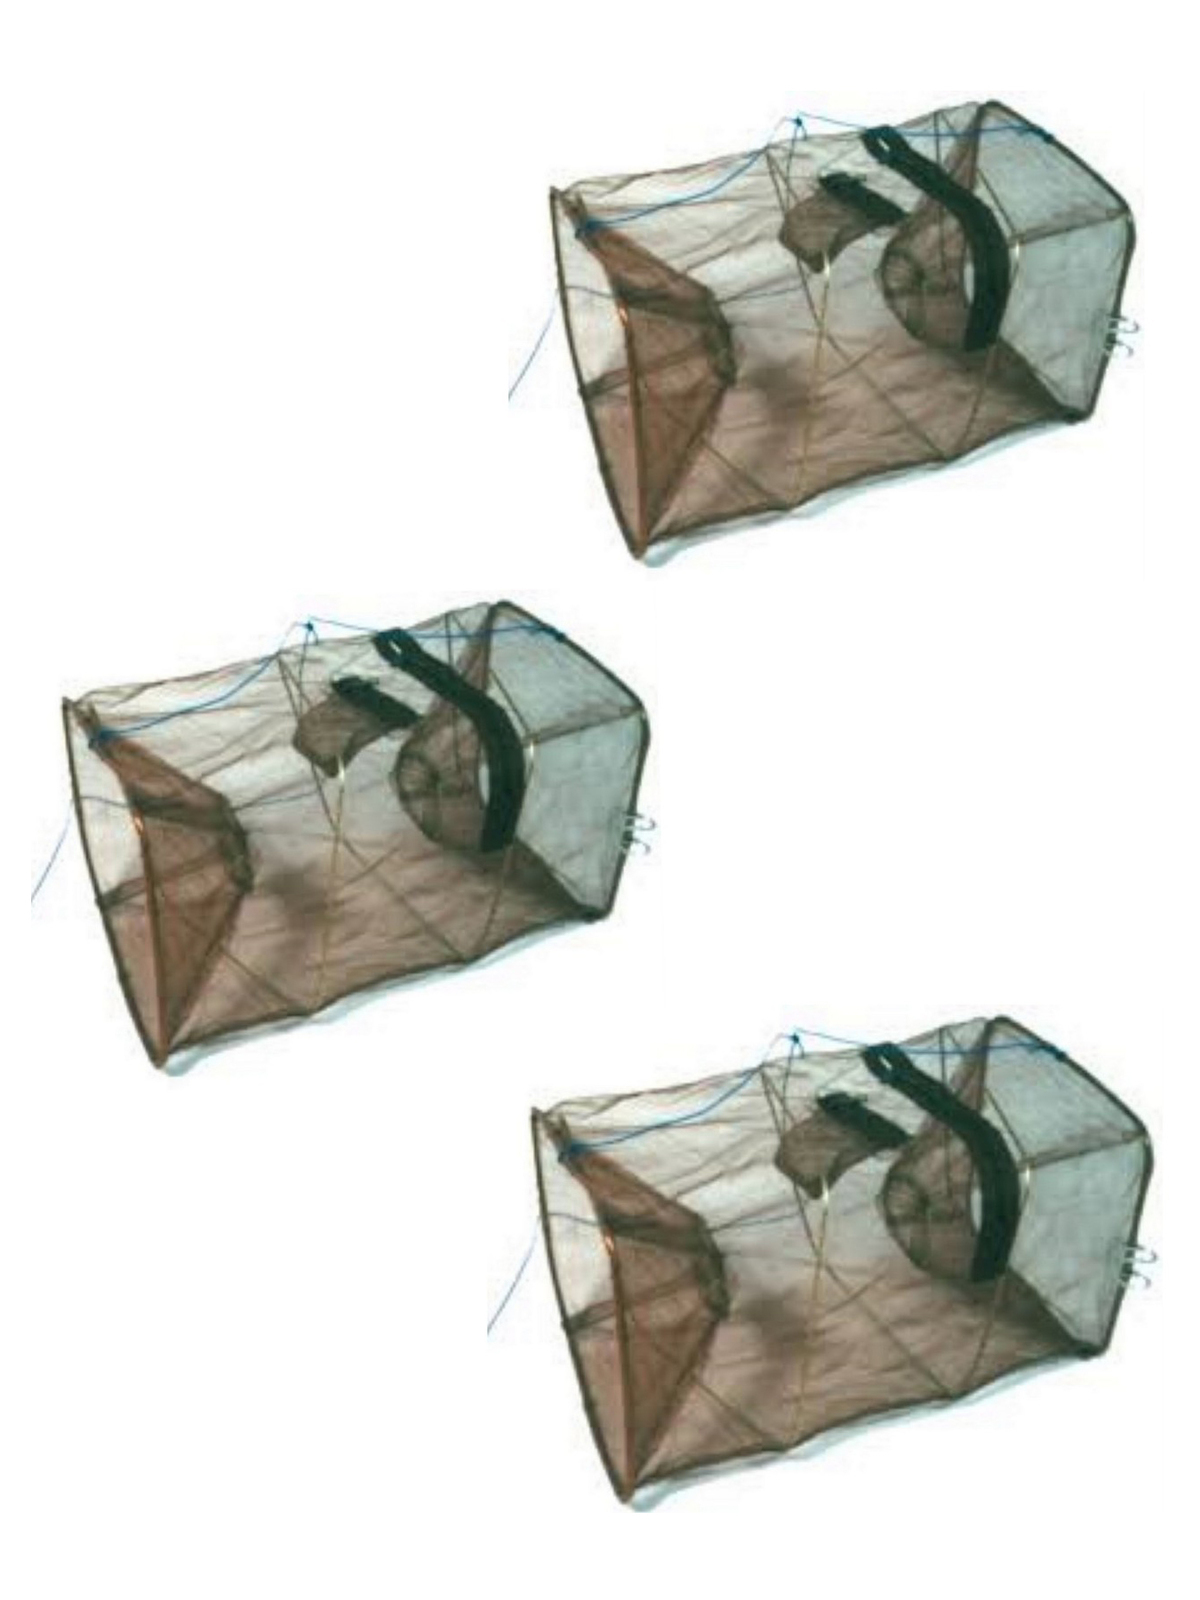 3 x Seahorse Collapsible Shrimp/Bait Traps With 1 1/2 Inch Entry